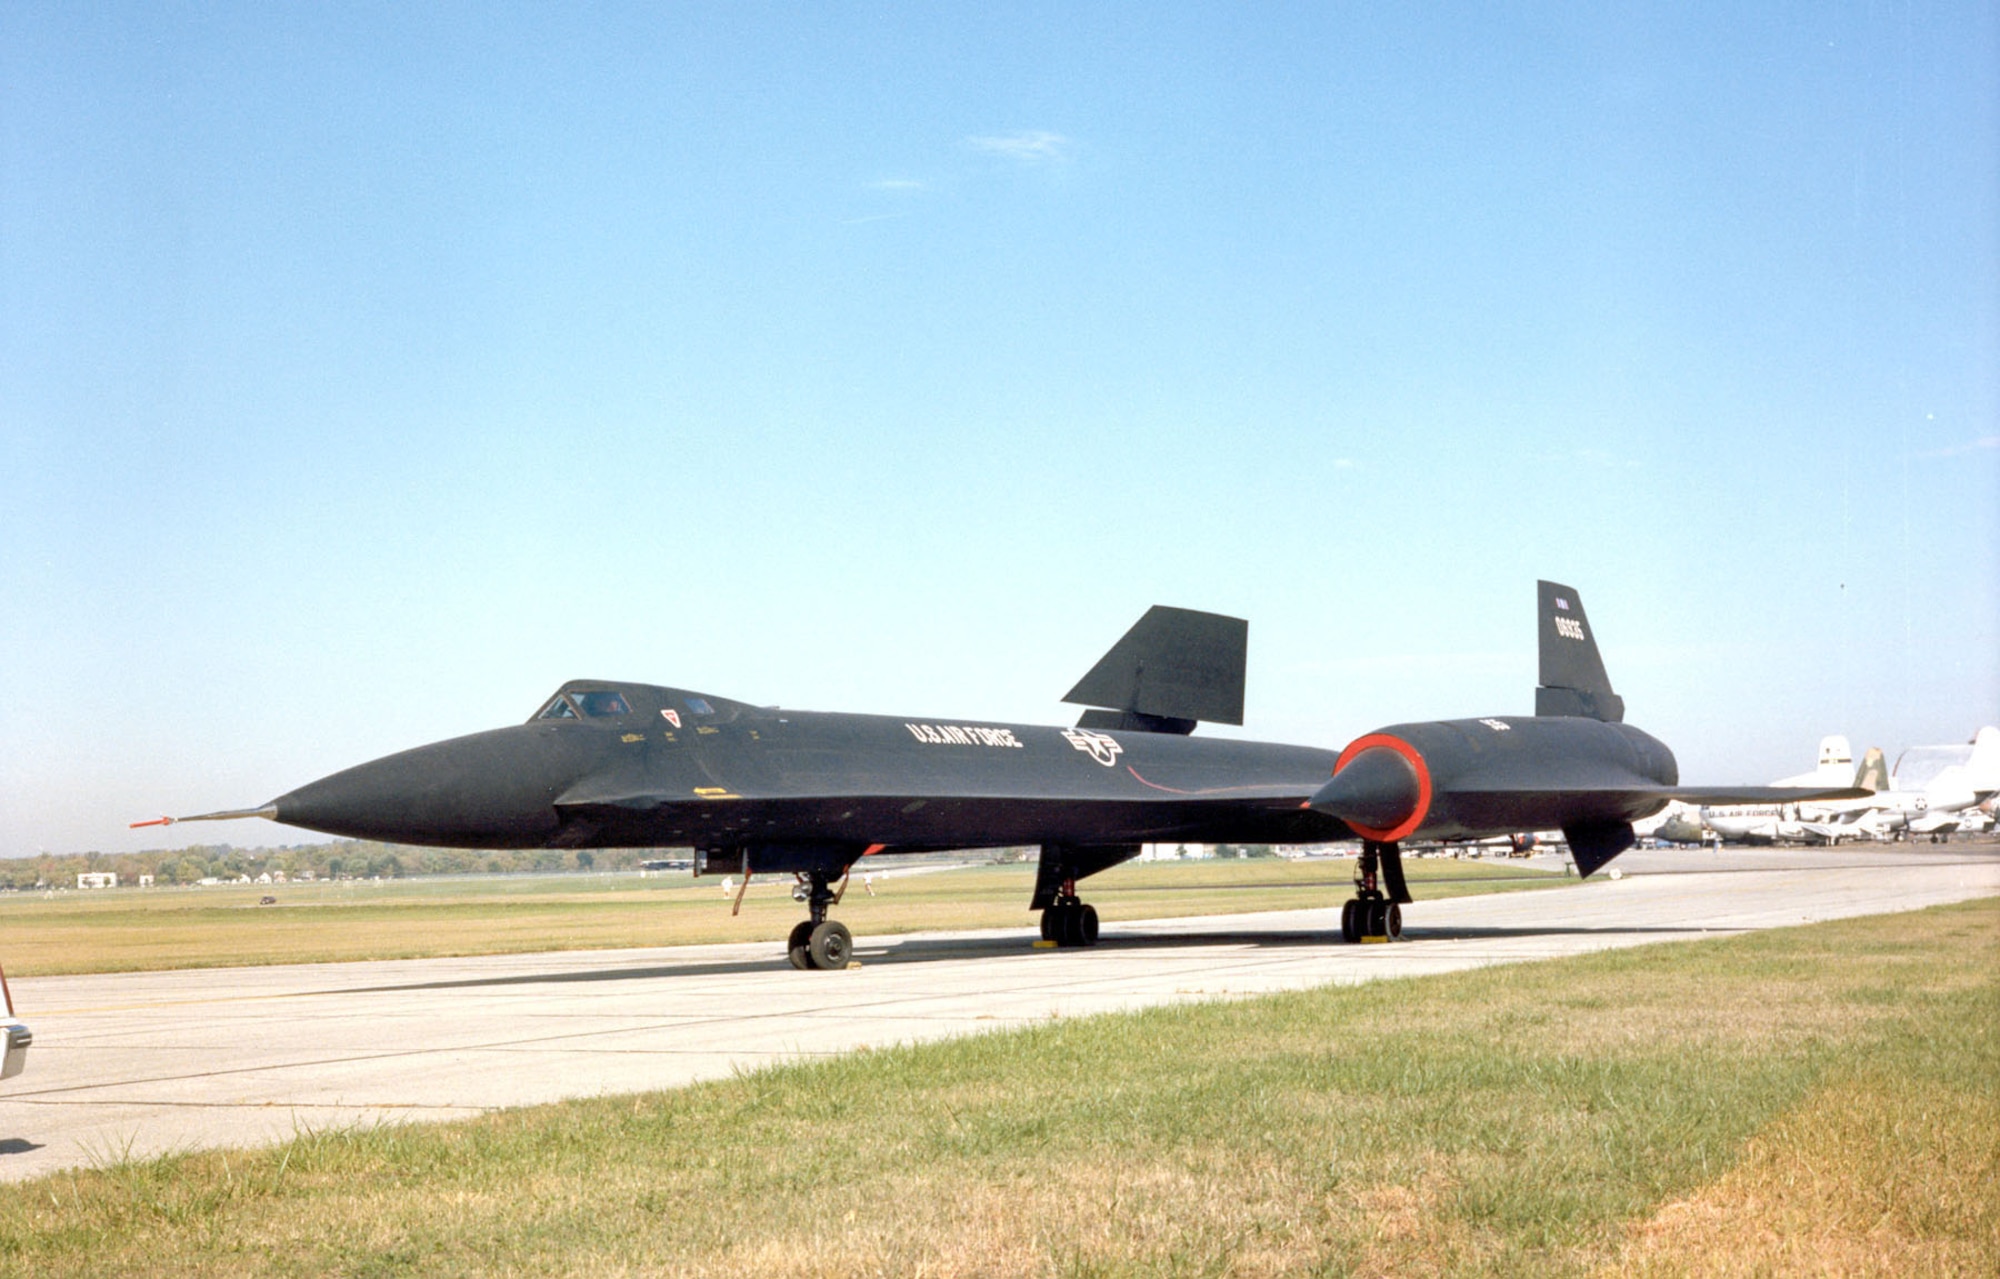 DAYTON, Ohio -- Lockheed YF-12A at the National Museum of the United States Air Force. (U.S. Air Force photo)